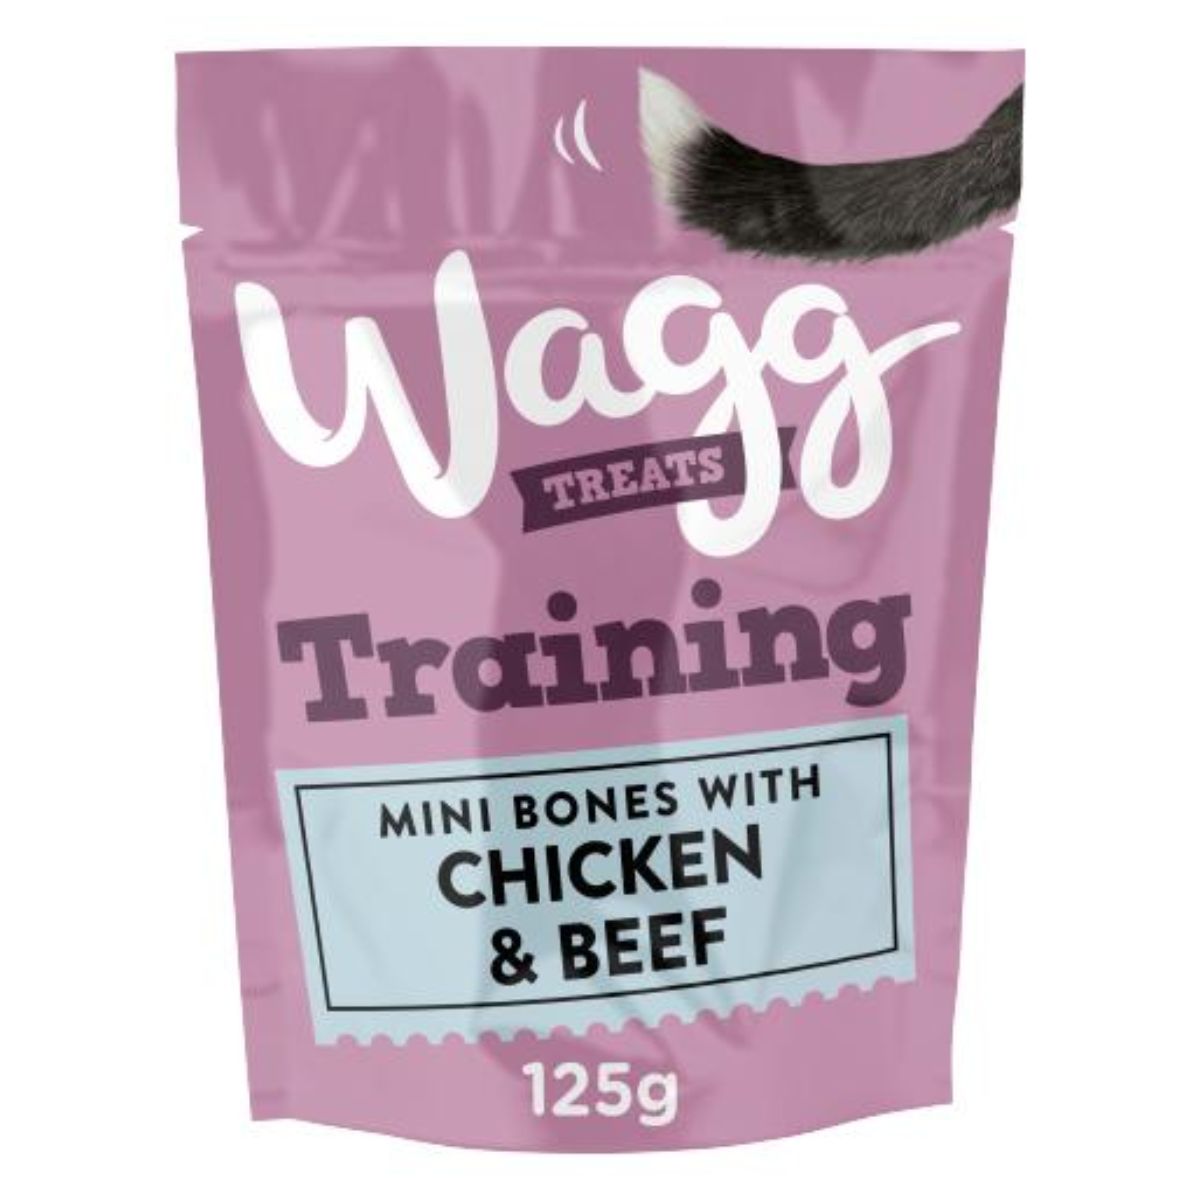 Wagg - Training Treats with Chicken & Lamb - 125g training mini bones with chicken and beef.